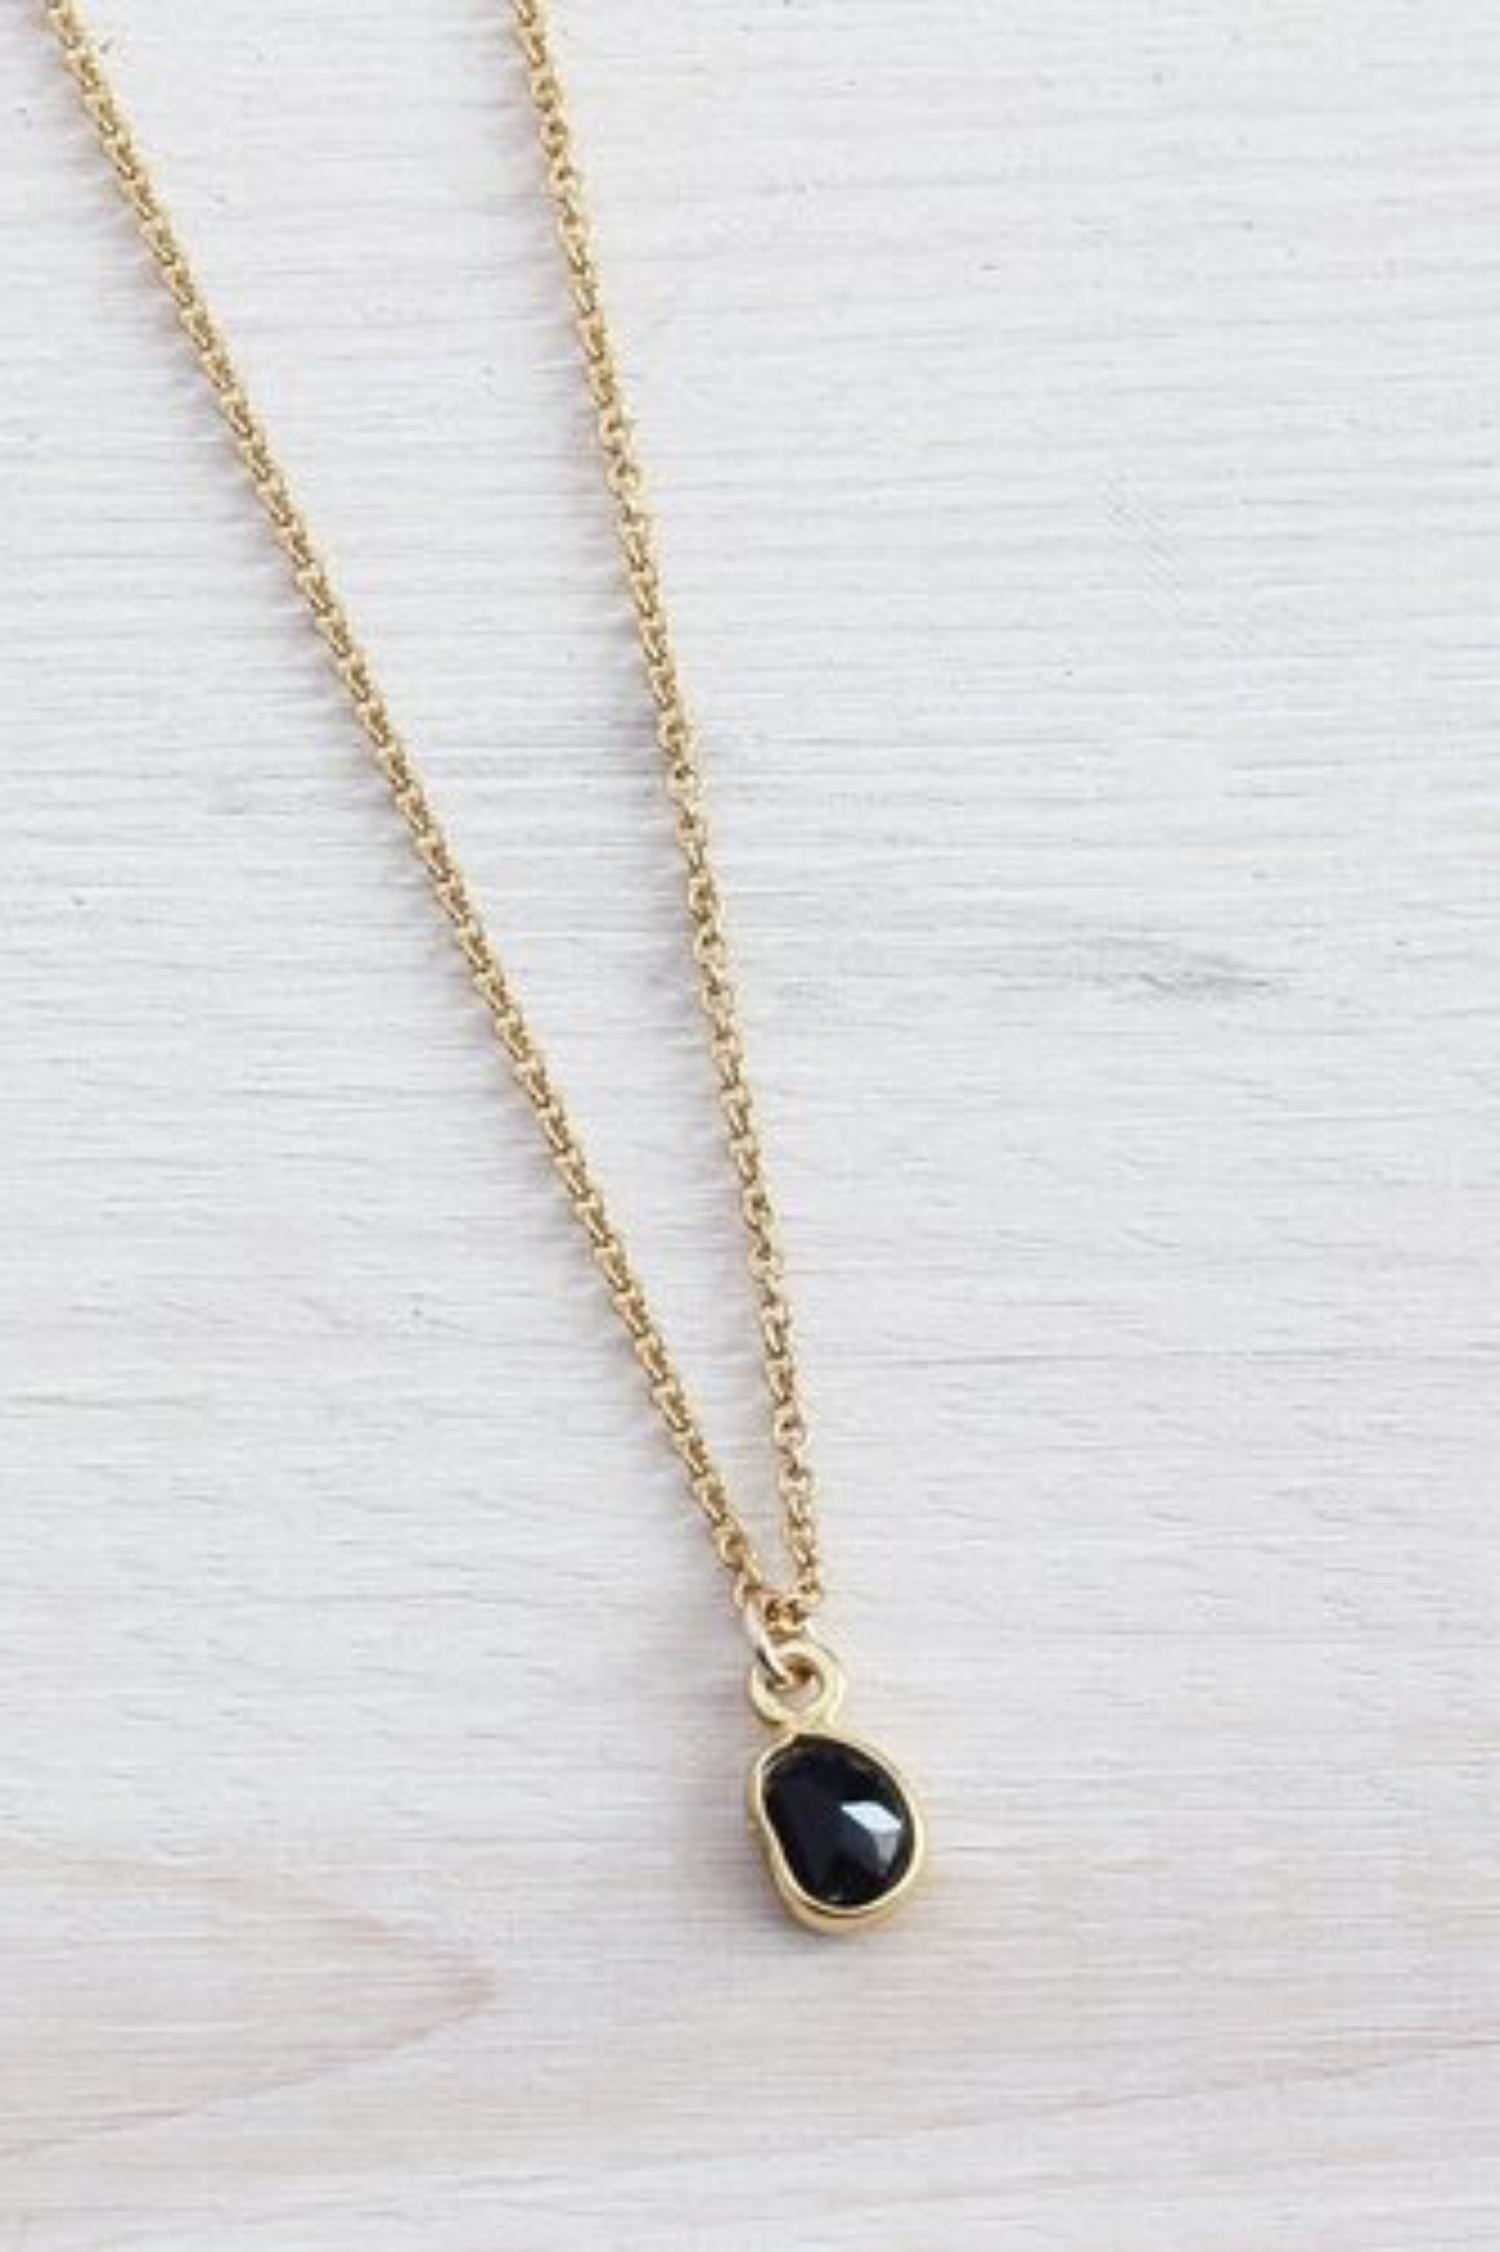 Mini Gem Necklace by Katye Landry, Onyx, gold vermeil, 14k goldfill round cable chain, made in Ottawa